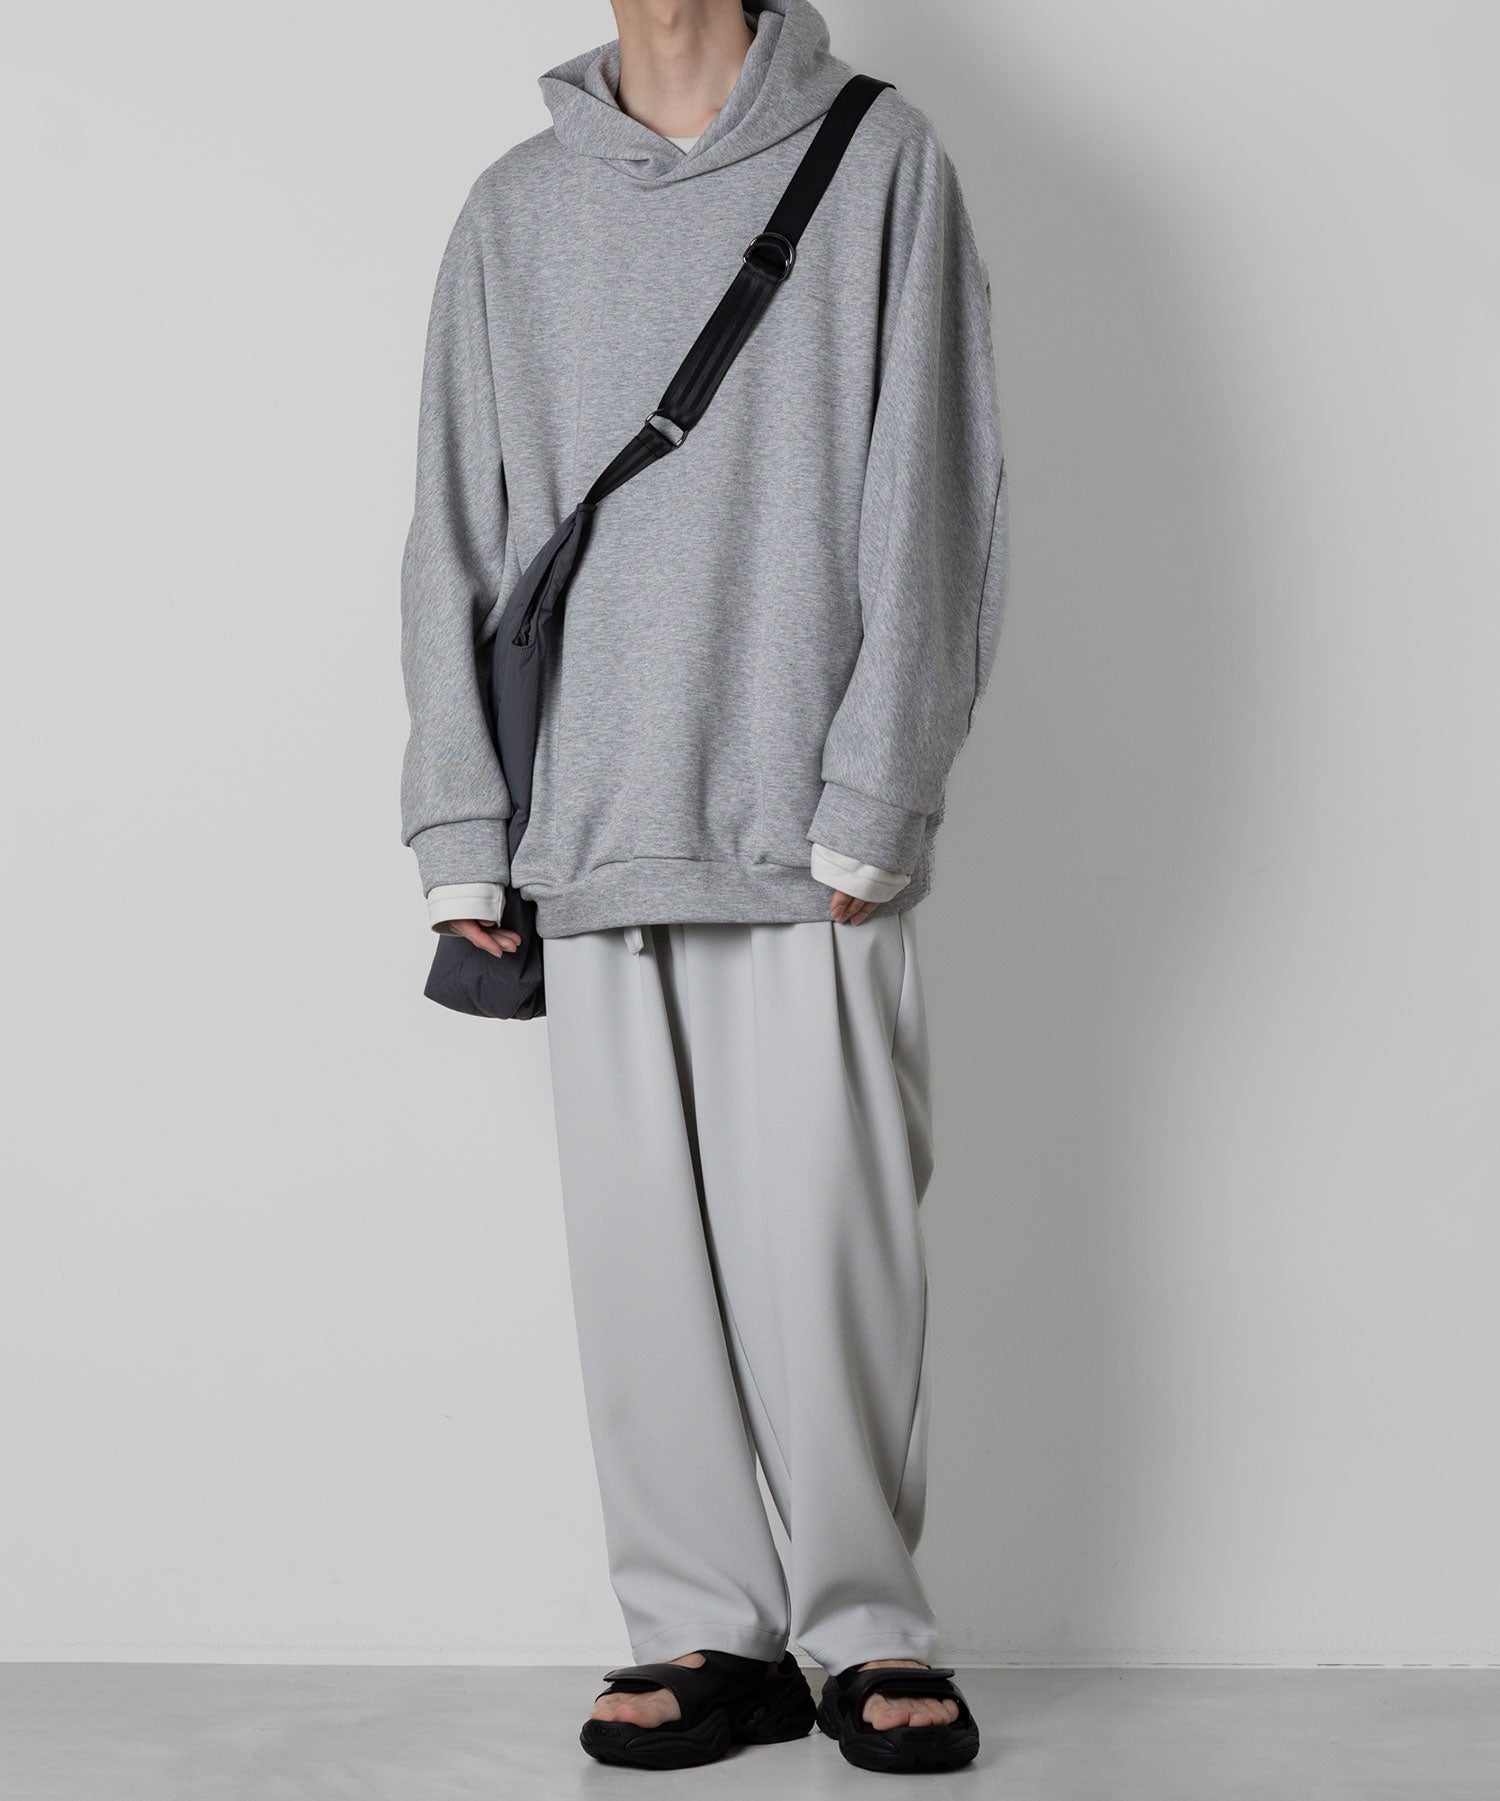 【ATTACHMENT】ATTACHMENT アタッチメントのPE STRECH DOUBLE CLOTH BELTED TAPERD FIT TROUSERS - L.GRAY 公式通販サイトsession福岡セレクトショップ